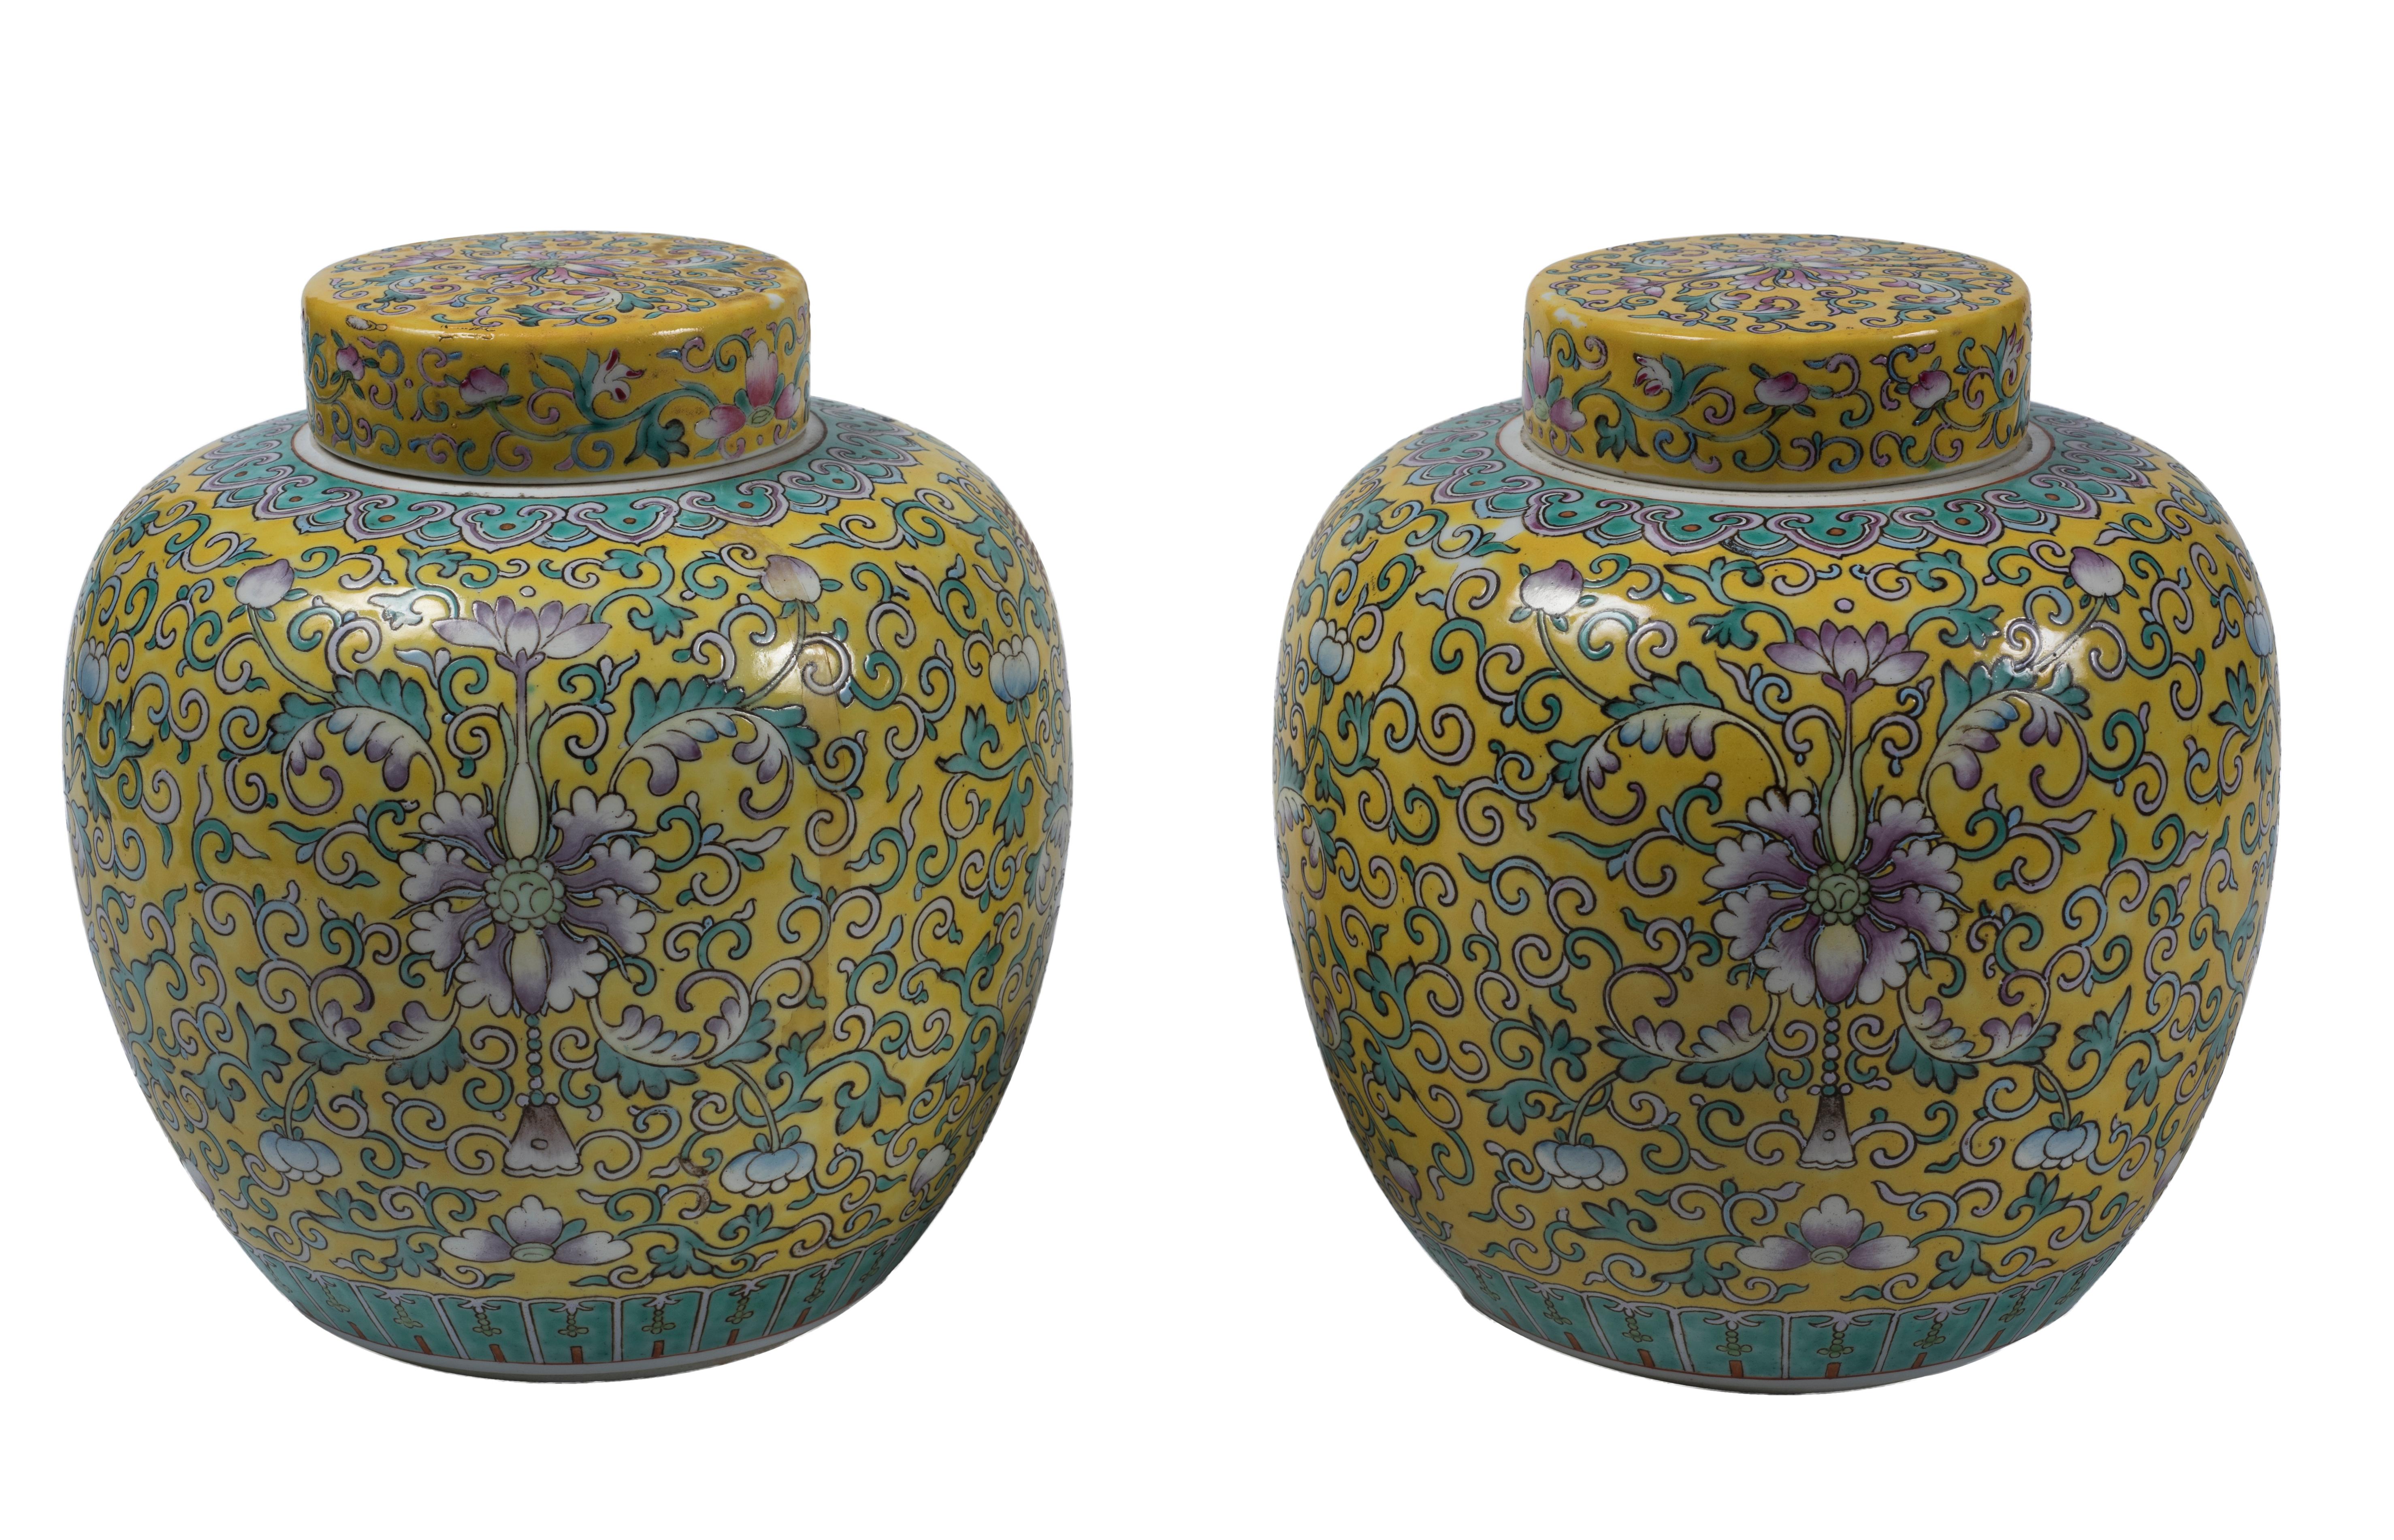 Couple of ginger pots is an elegant set of Chinese pots with yellow background and green and blue decorations.

Realized by Chinese manufacturer in the end 19th century.

Very good conditions.

This artwork is shipped from Italy. Under